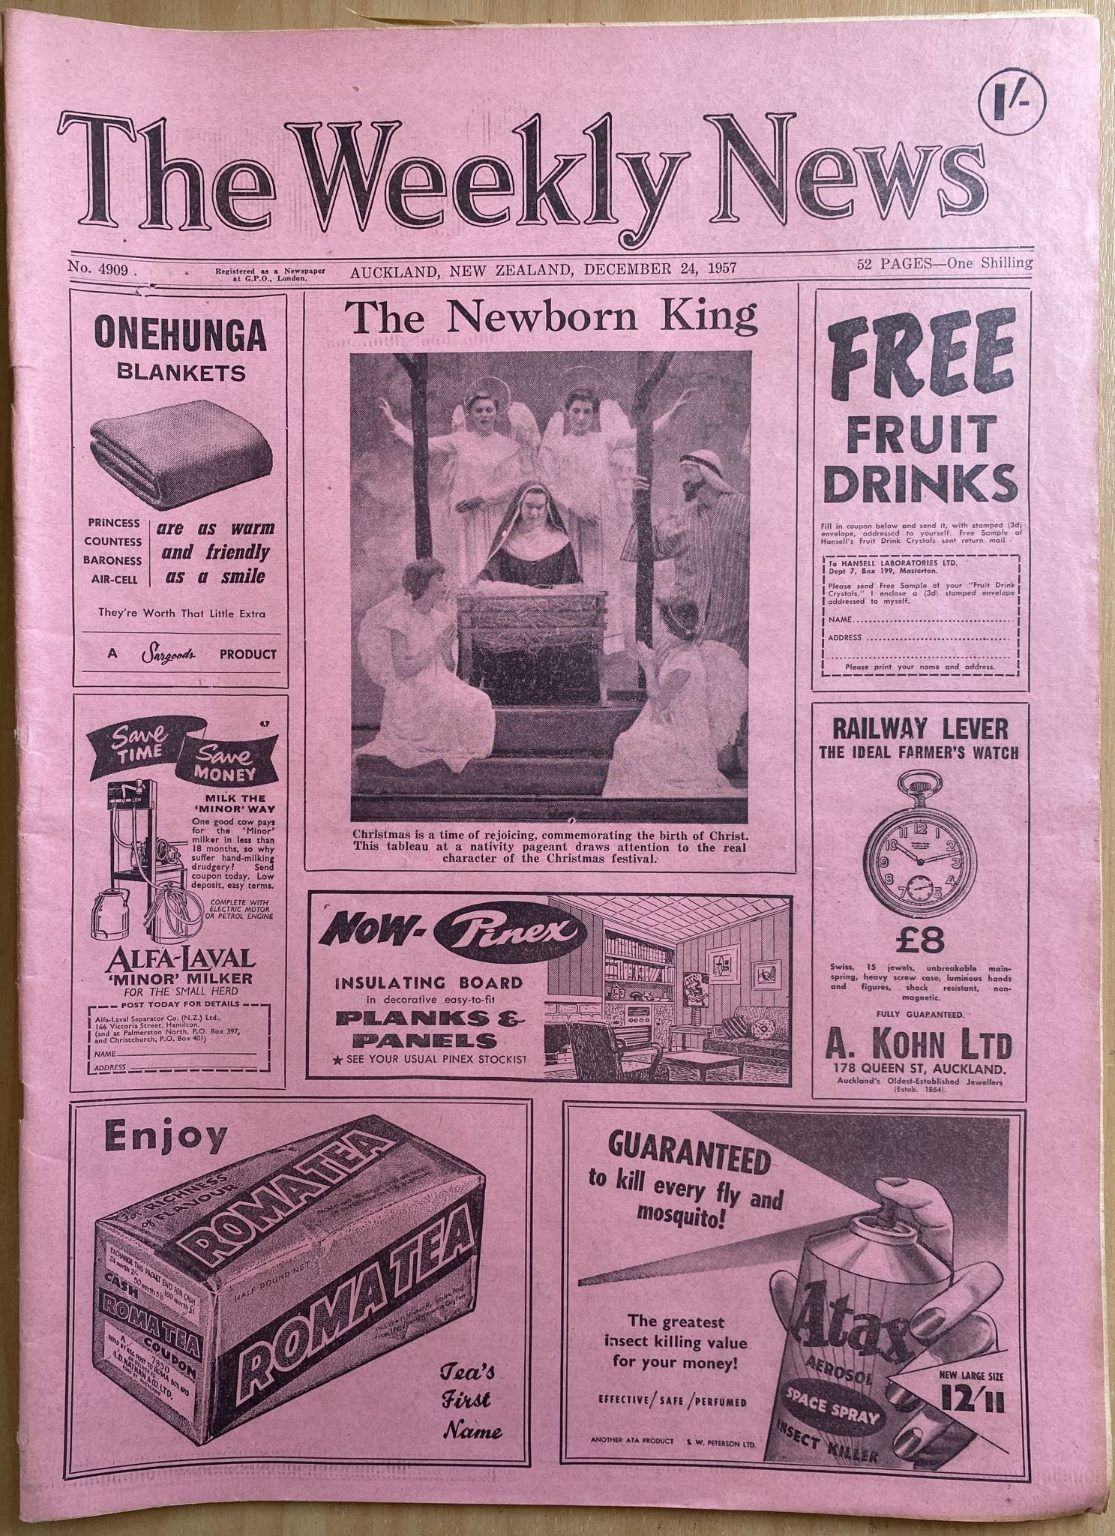 OLD NEWSPAPER: The Weekly News, No. 4909, 24 December 1957